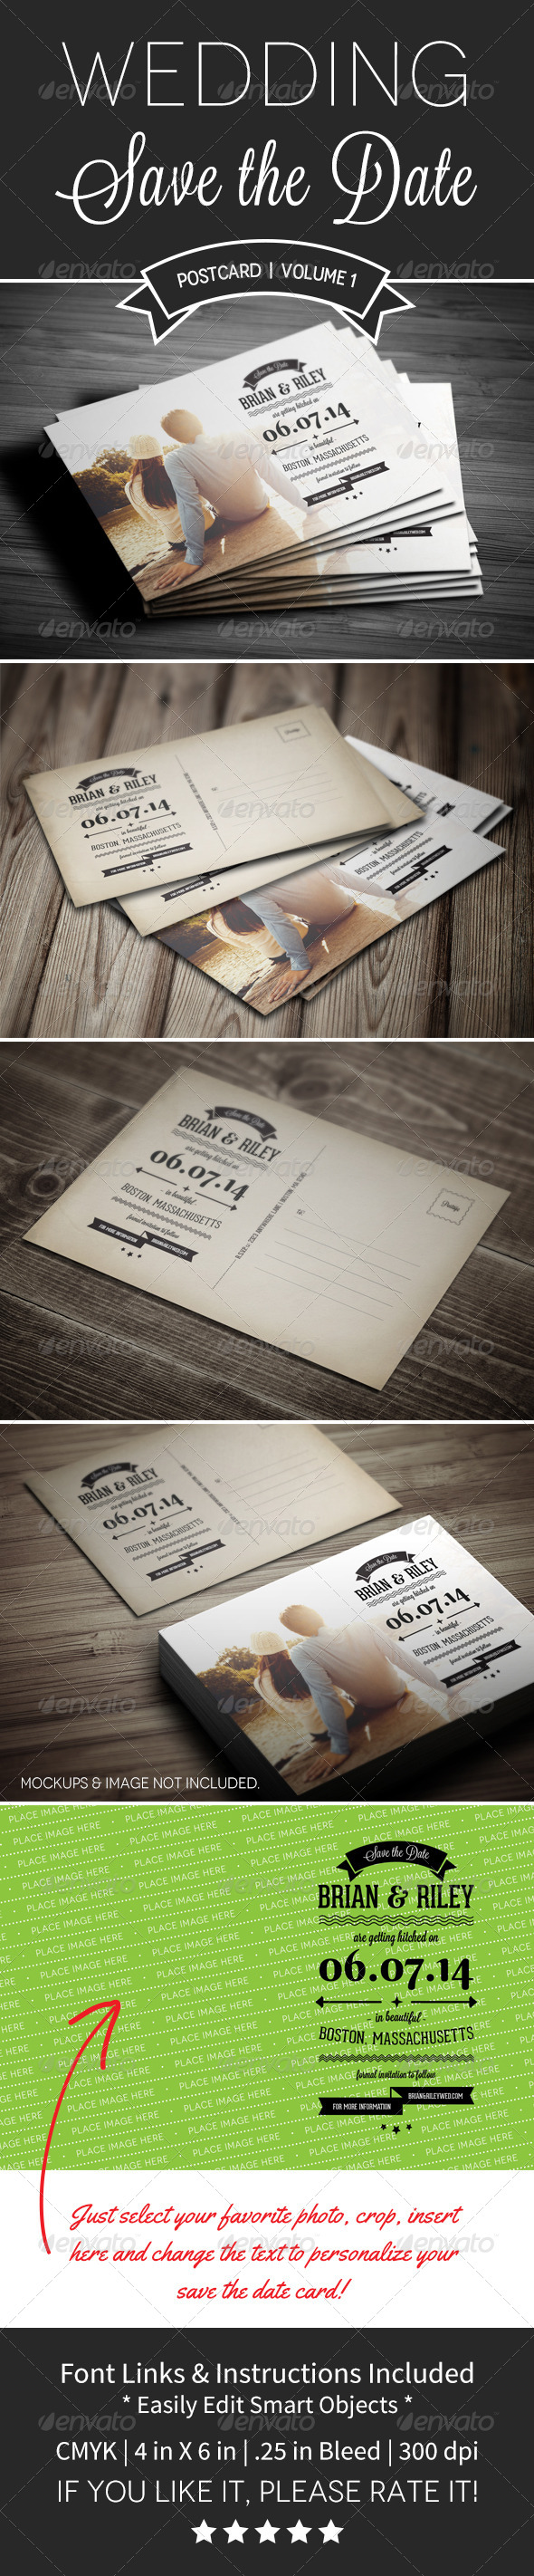 Save The Date Postcard | Volume 1 by MakeMediaCo | GraphicRiver